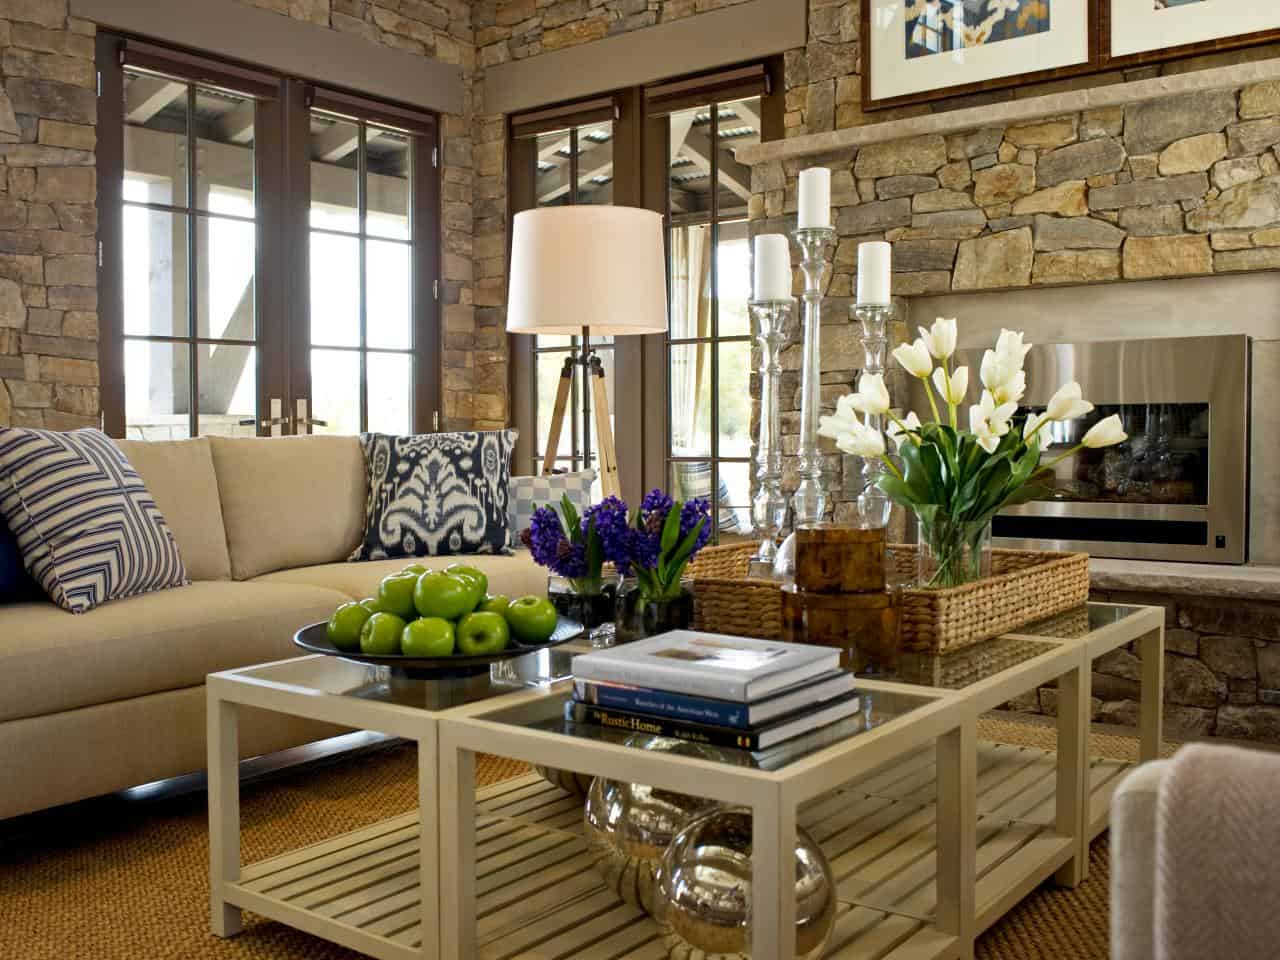 Floating coffee tables happen to be a favorite because of the space they offer.